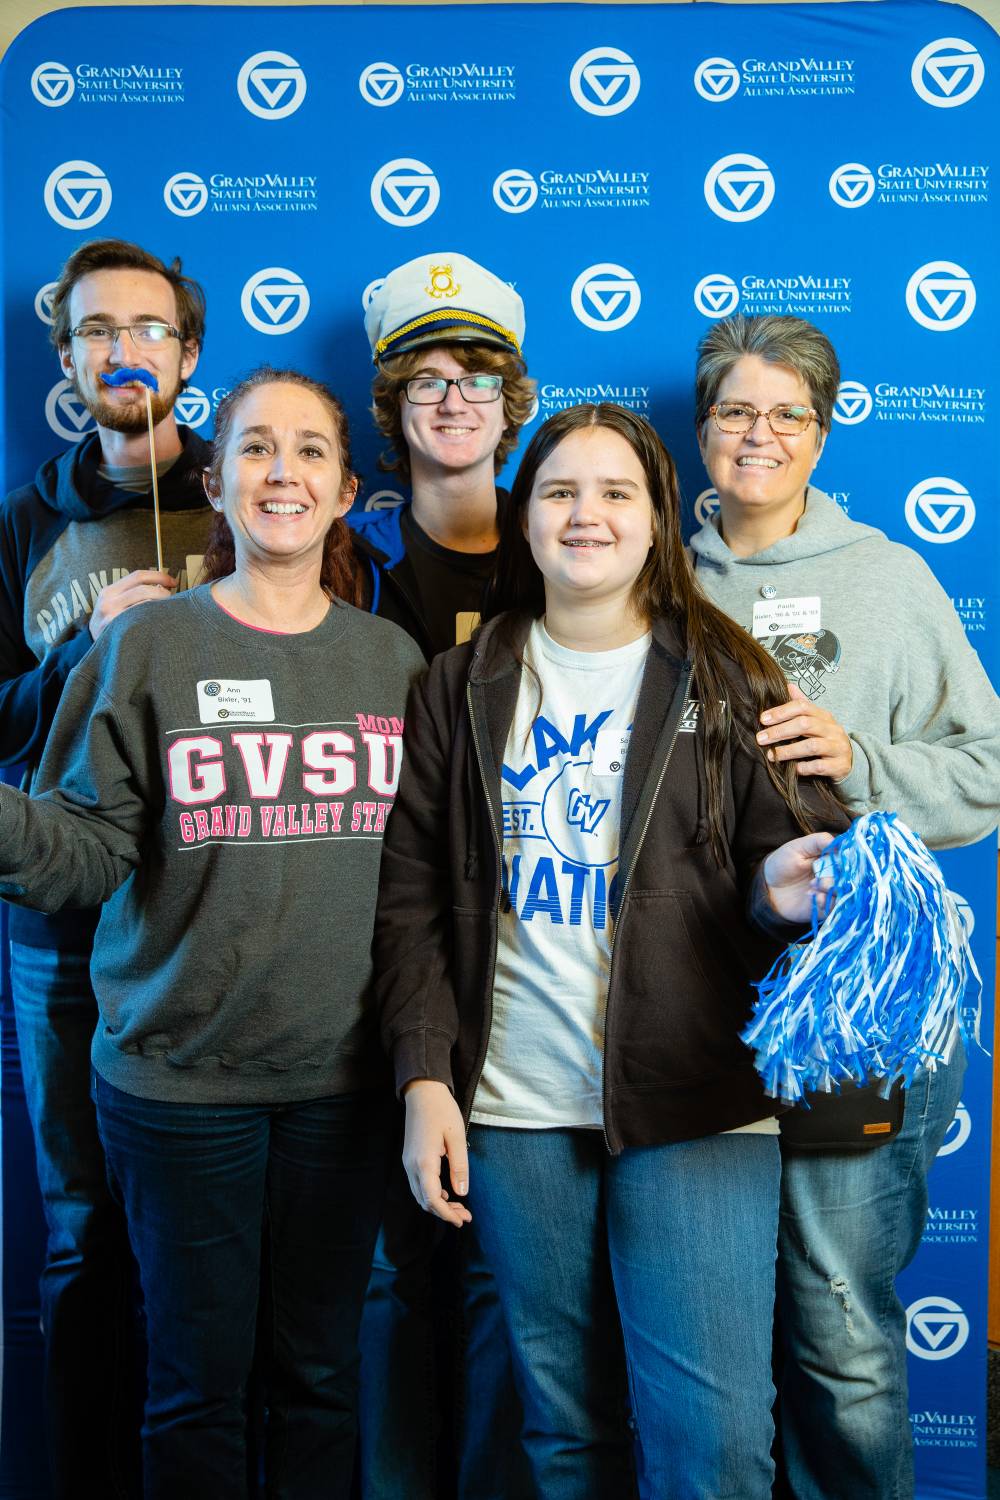 An alumni posing for a photo with her family.